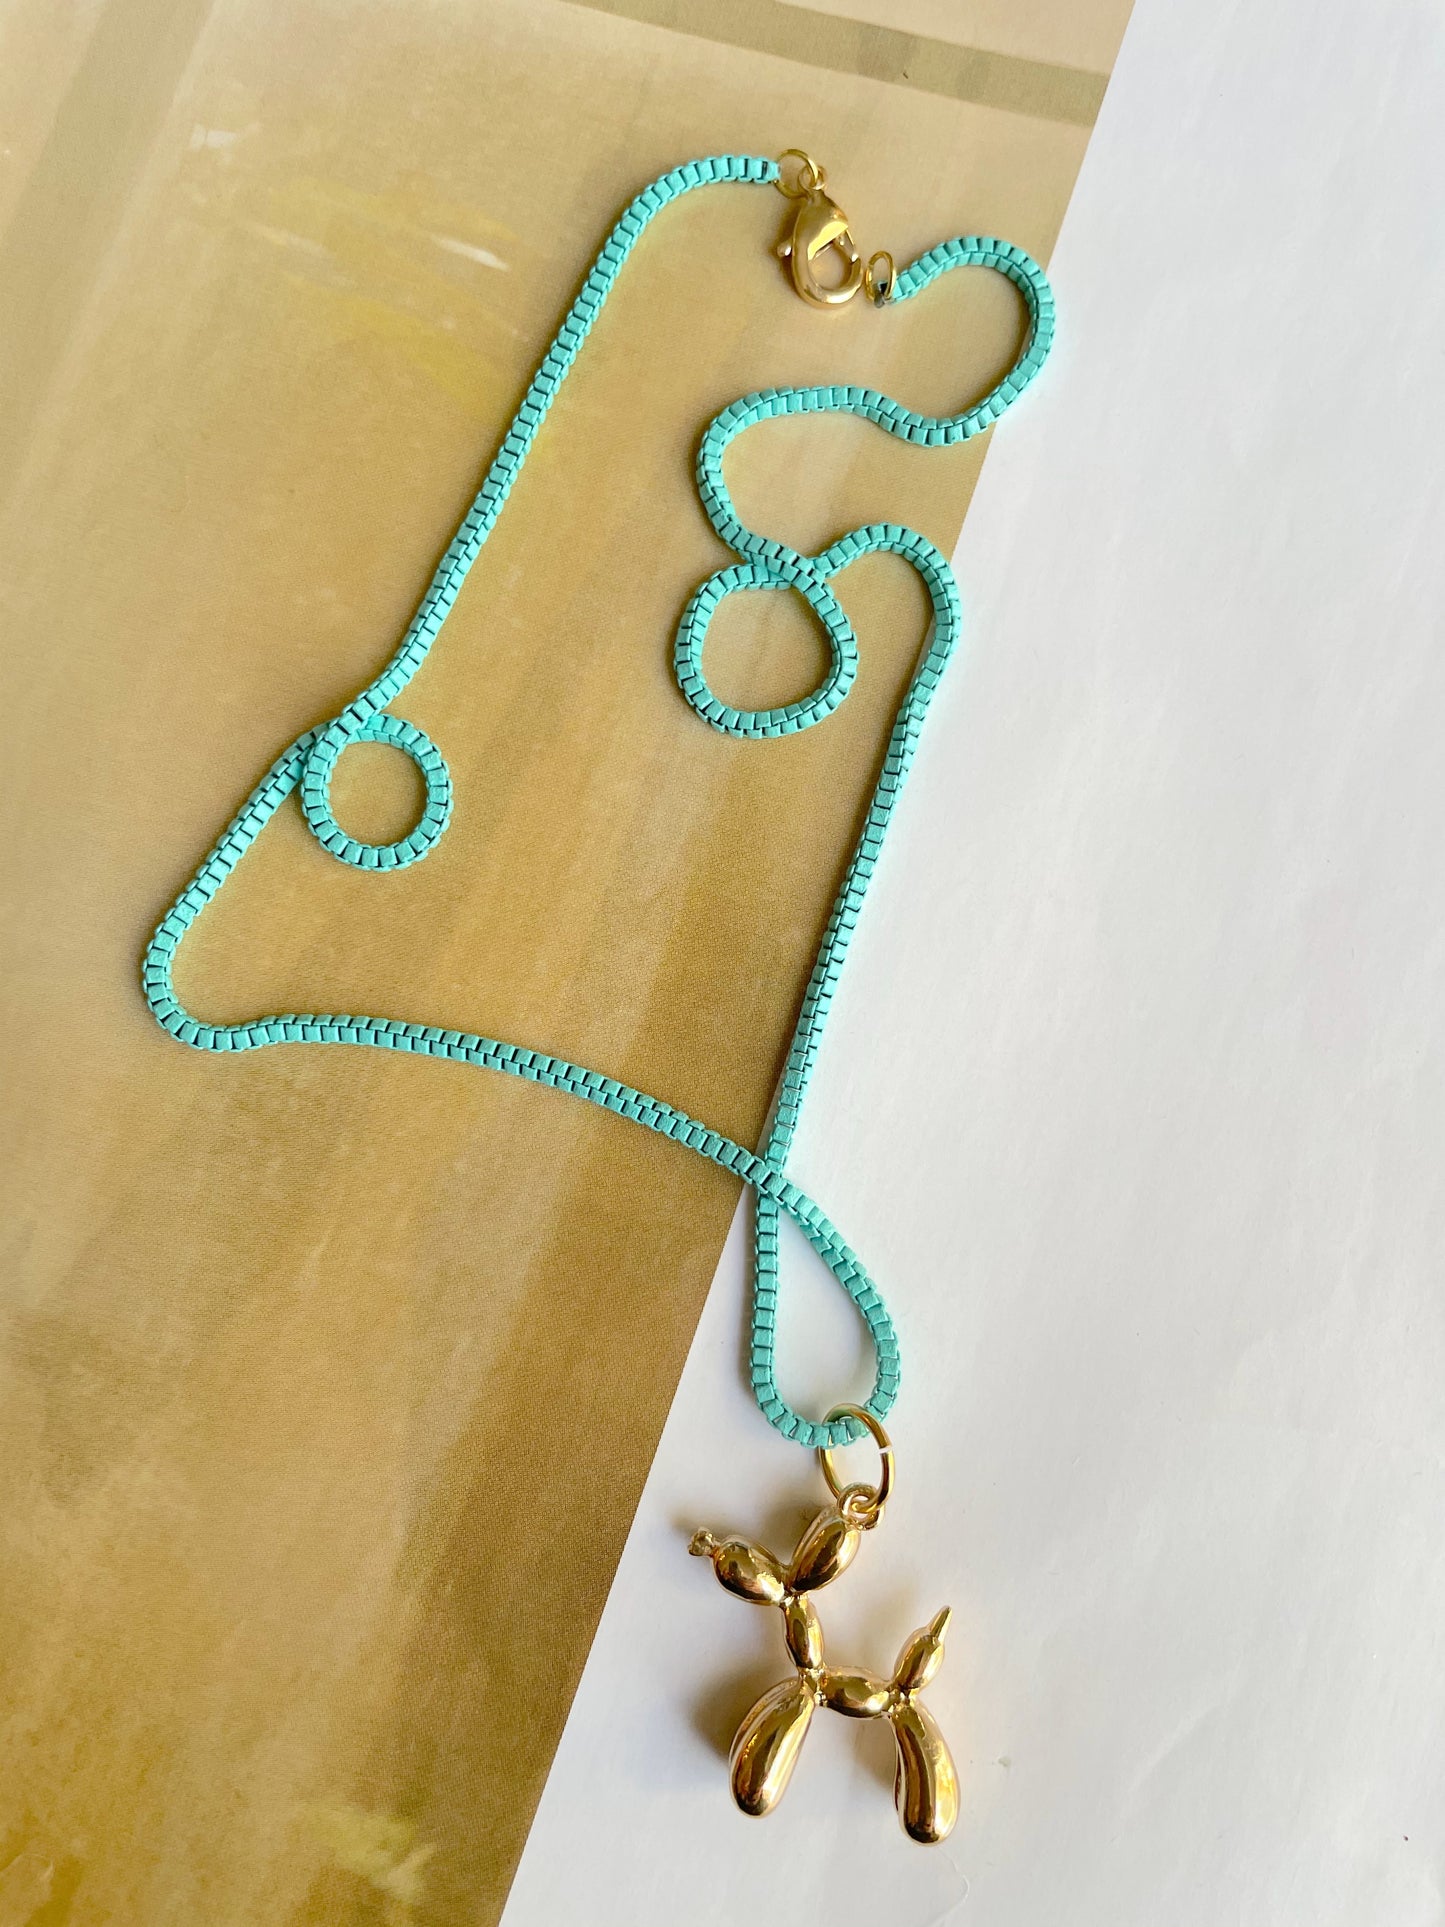 Balloon Dog Colored necklaces